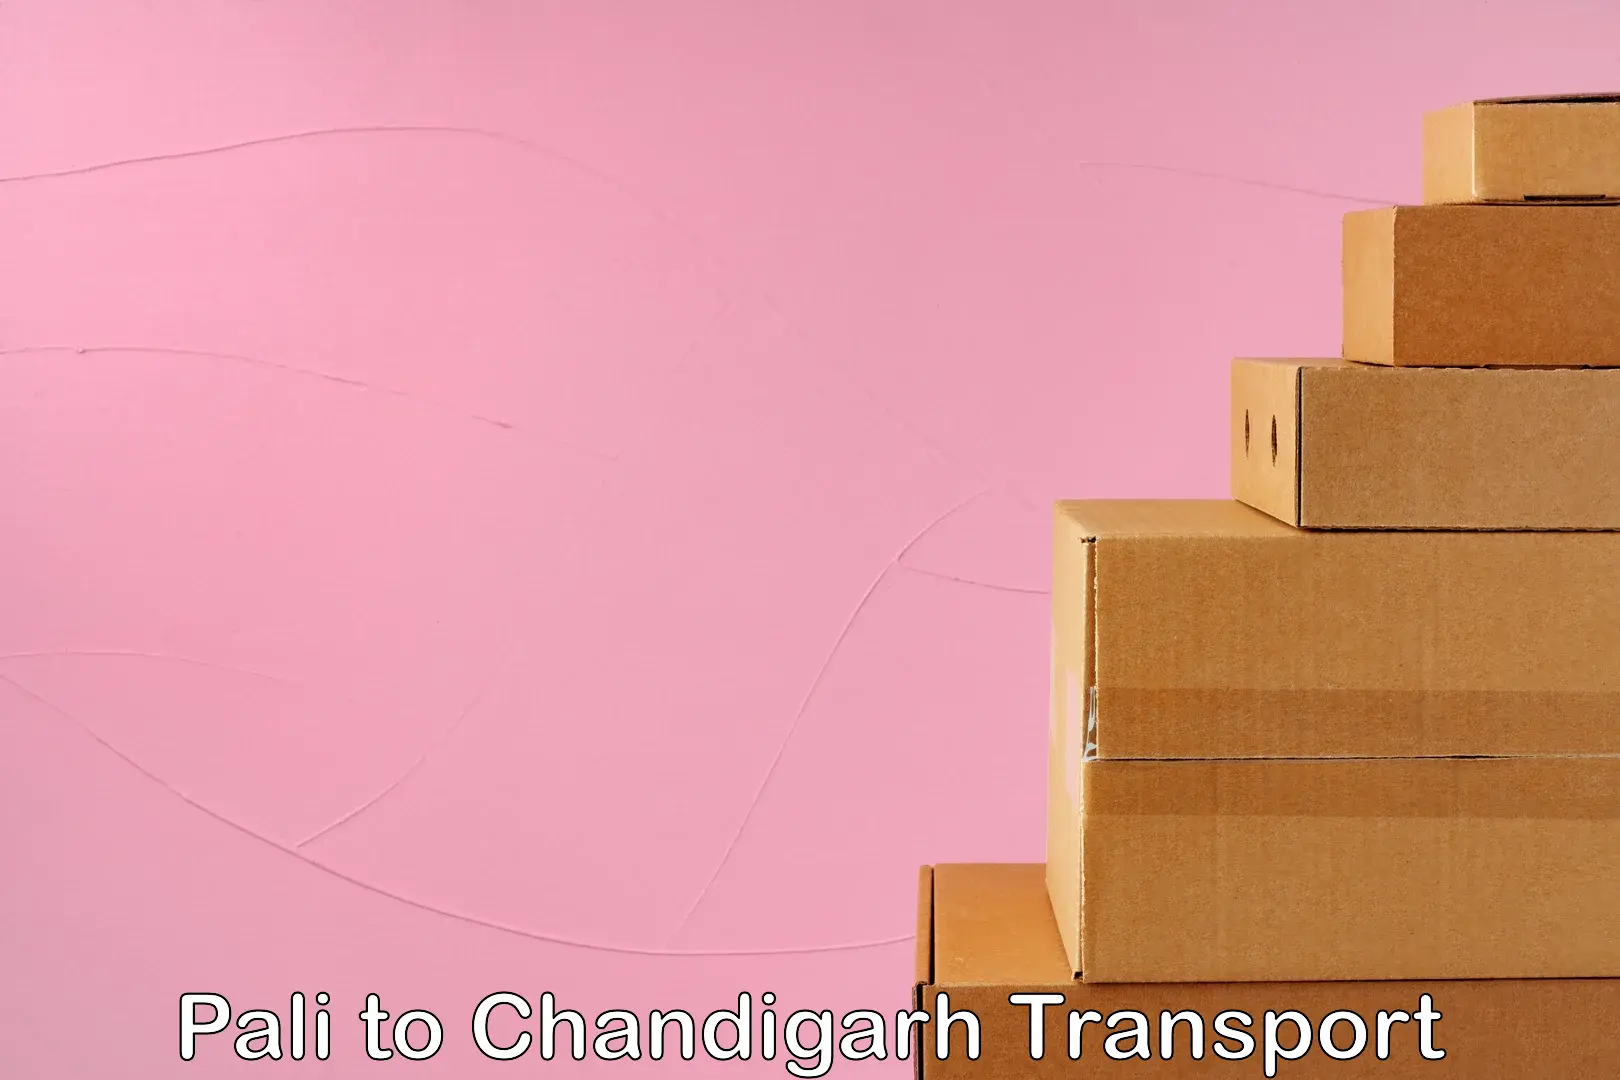 Express transport services Pali to Chandigarh